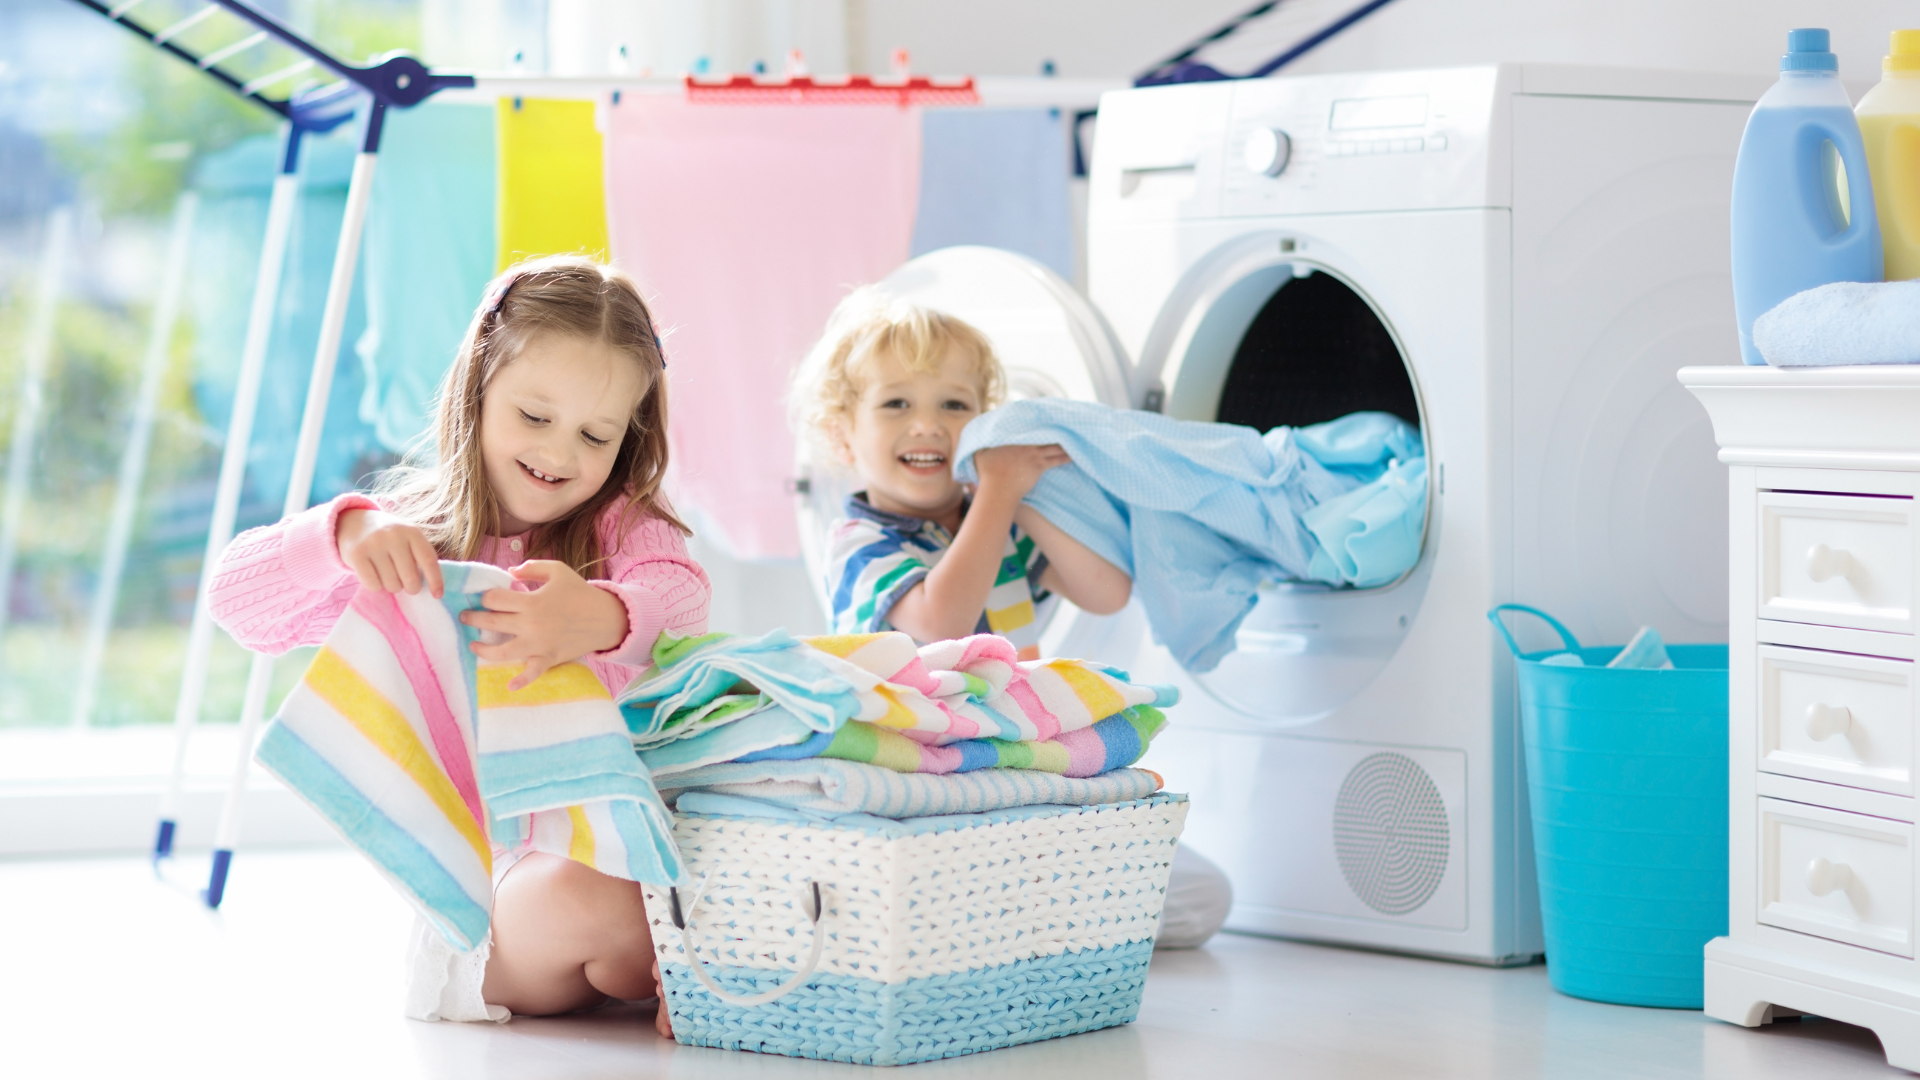 Say Goodbye to Damp Clothes: Why You Need a Tumble Dryer at Home